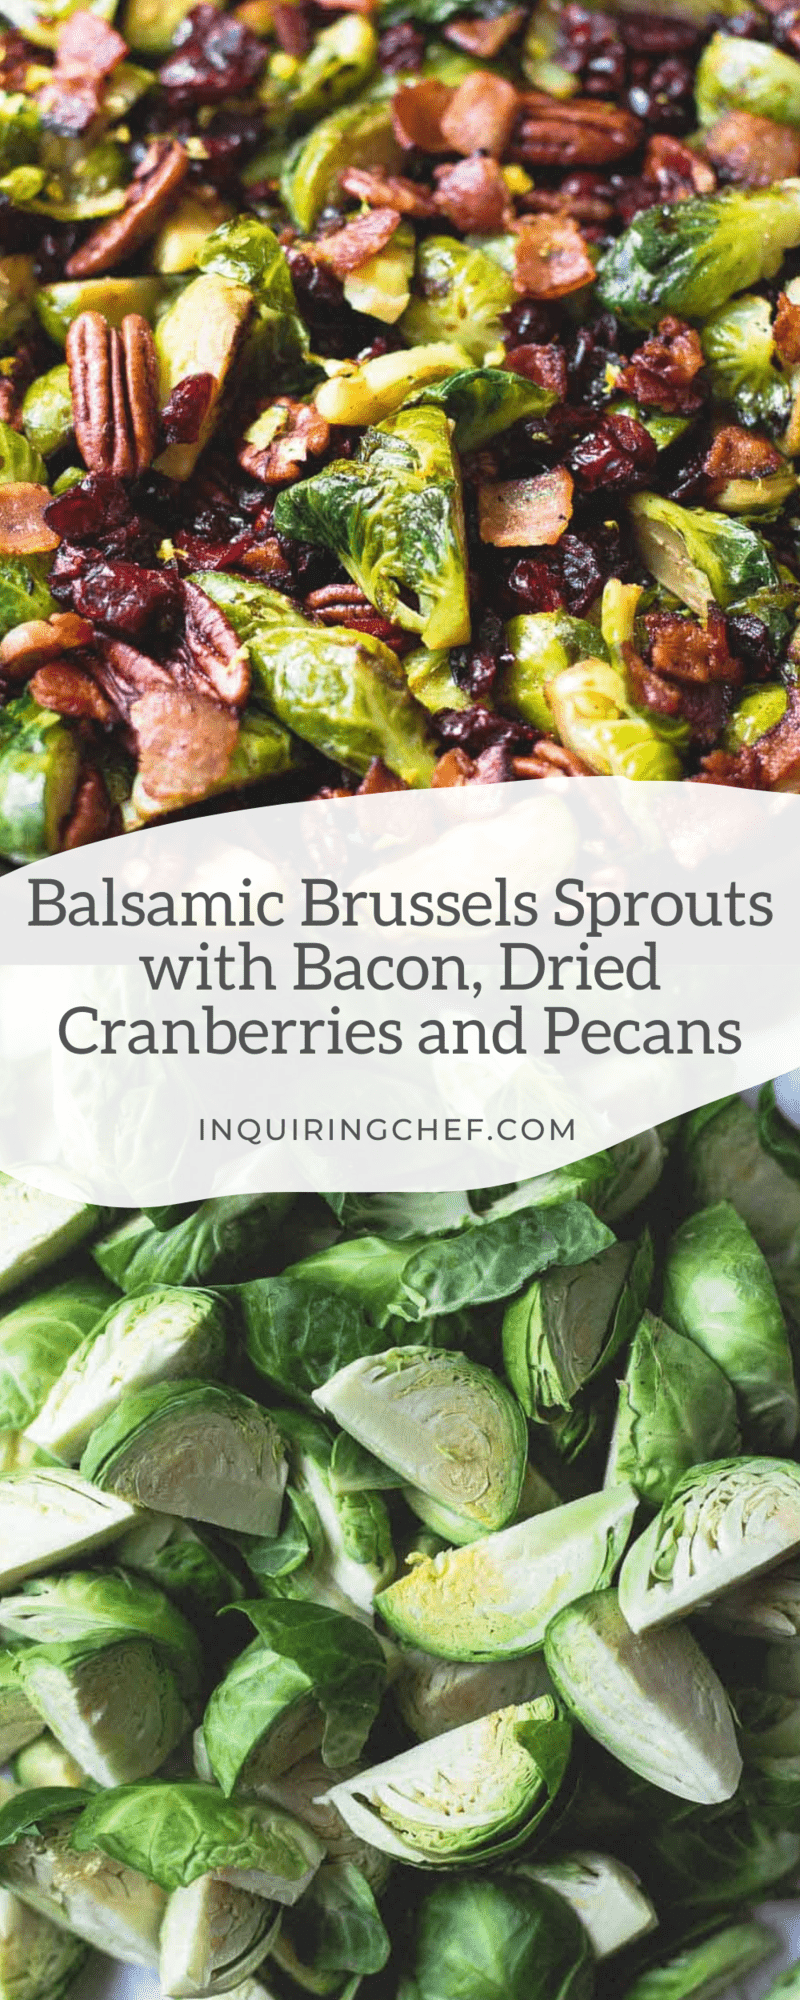 Balsamic Brussels Sprouts with Bacon, Dried Cranberries and Pecans